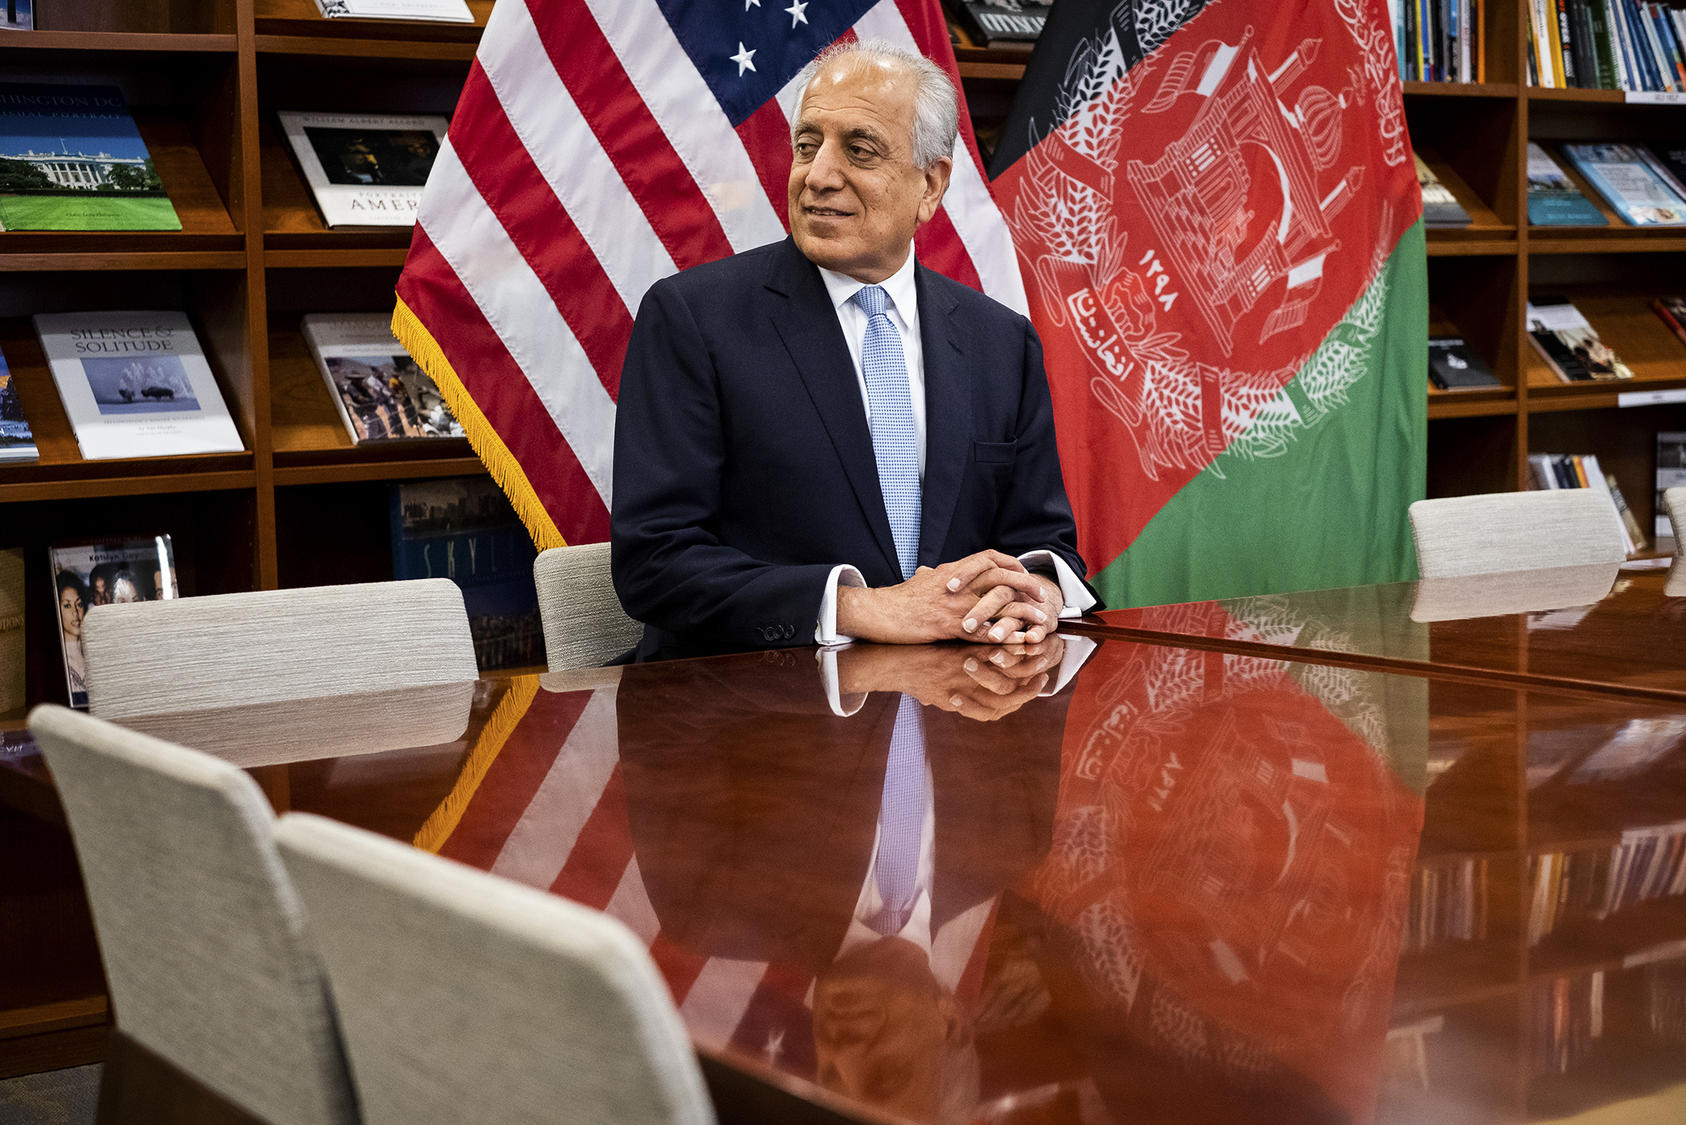 Zalmay Khalilzad, the special representative for Afghanistan reconciliation, at the United States Embassy in Kabul, Jan. 28, 2019. As American policy in Afghanistan seems bent more than ever on making a deal with Taliban insurgents to withdraw American troops from the country after nearly two decades of war, Khalilzad’s diplomacy is taking priority. (Jim Huylebroek/The New York Times)